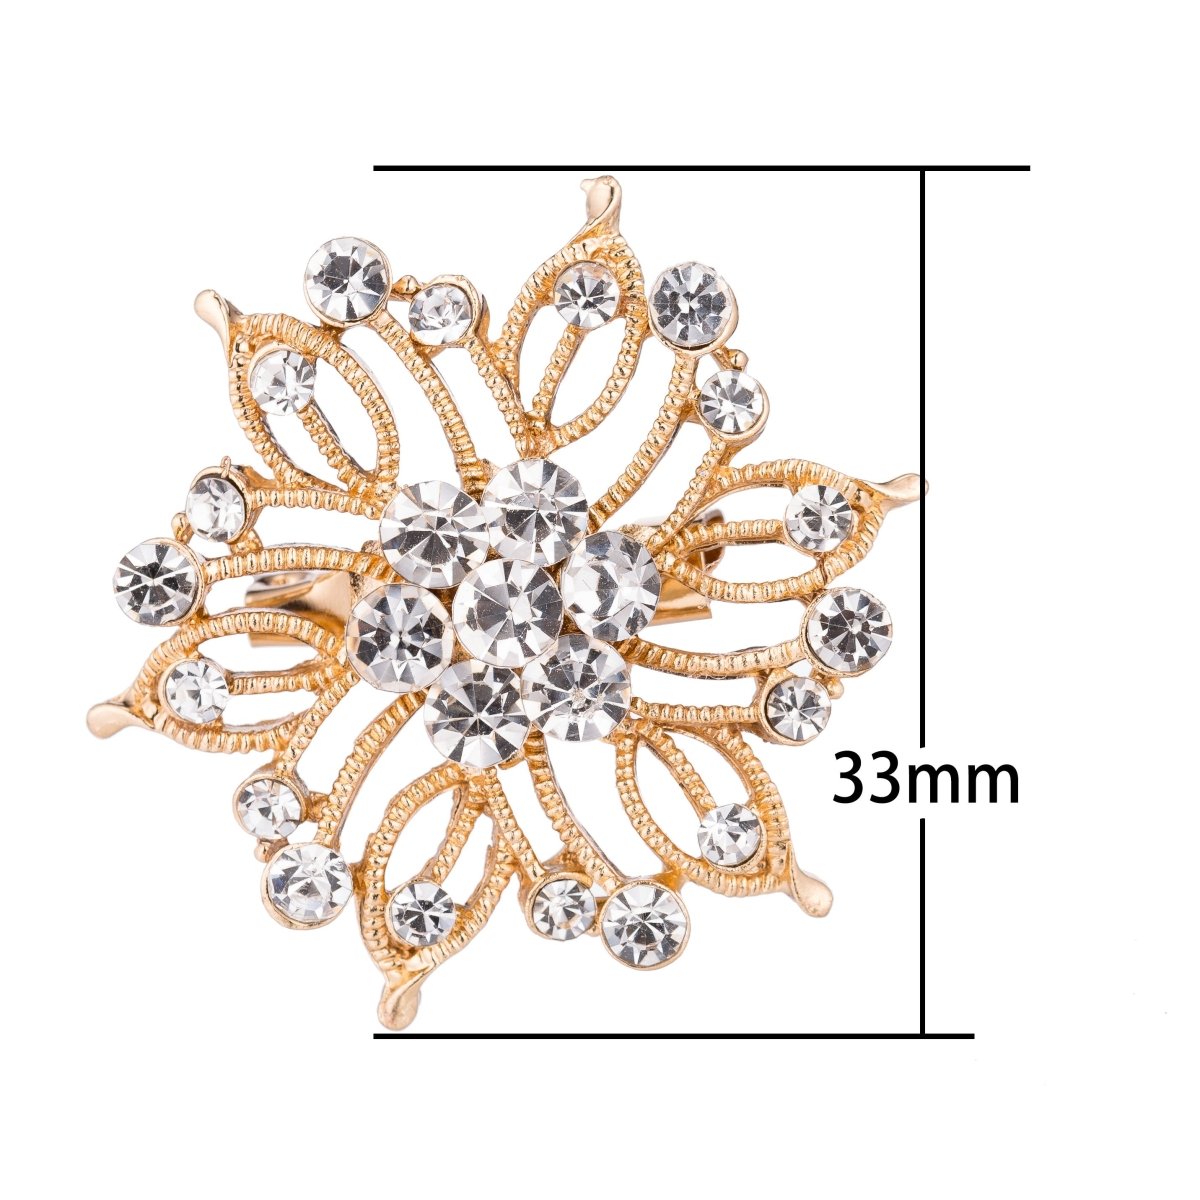 Elegant Gold Wedding Ceremony Brooch Bridal Bridesmaid Plated Material With Crystals Design Great Gift Ideas for Her - DLUXCA